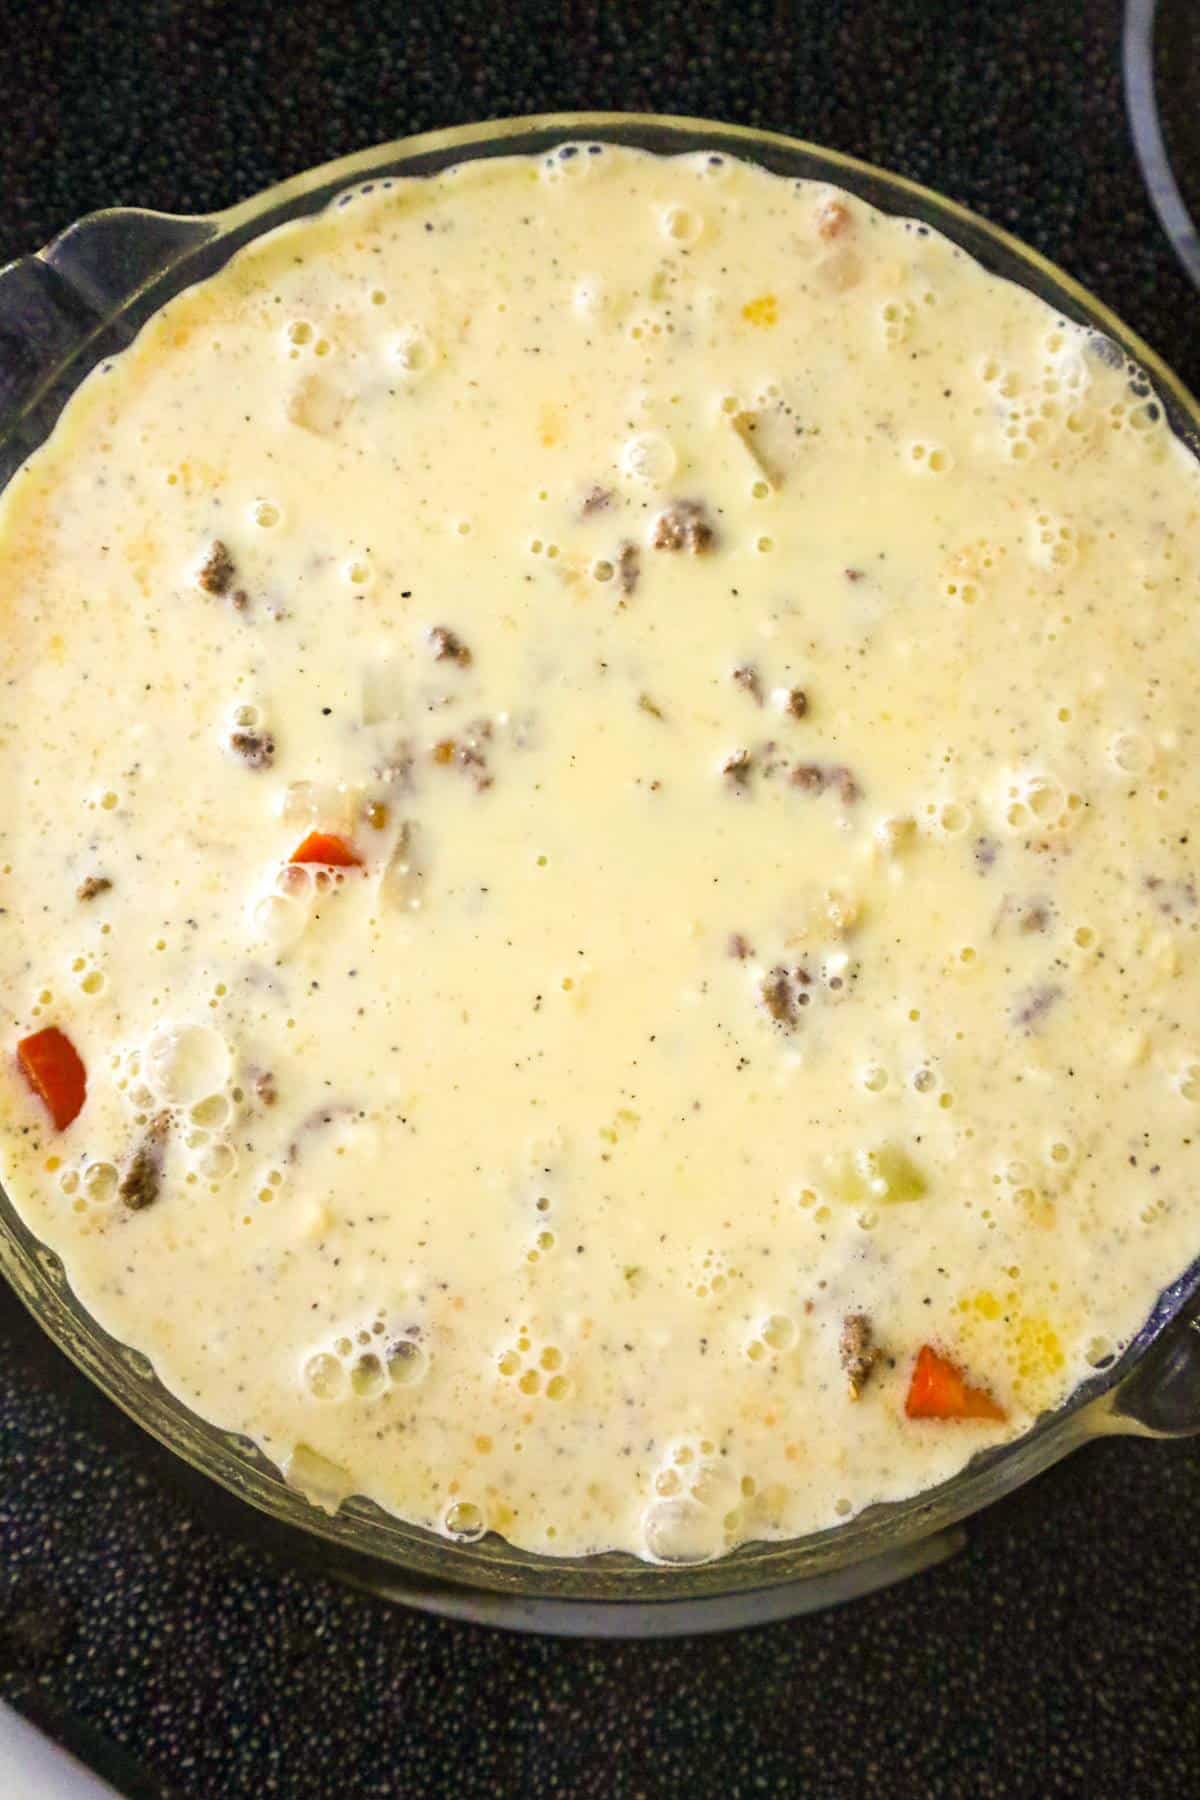 Bisquick mix poured over ground beef in a pie plate